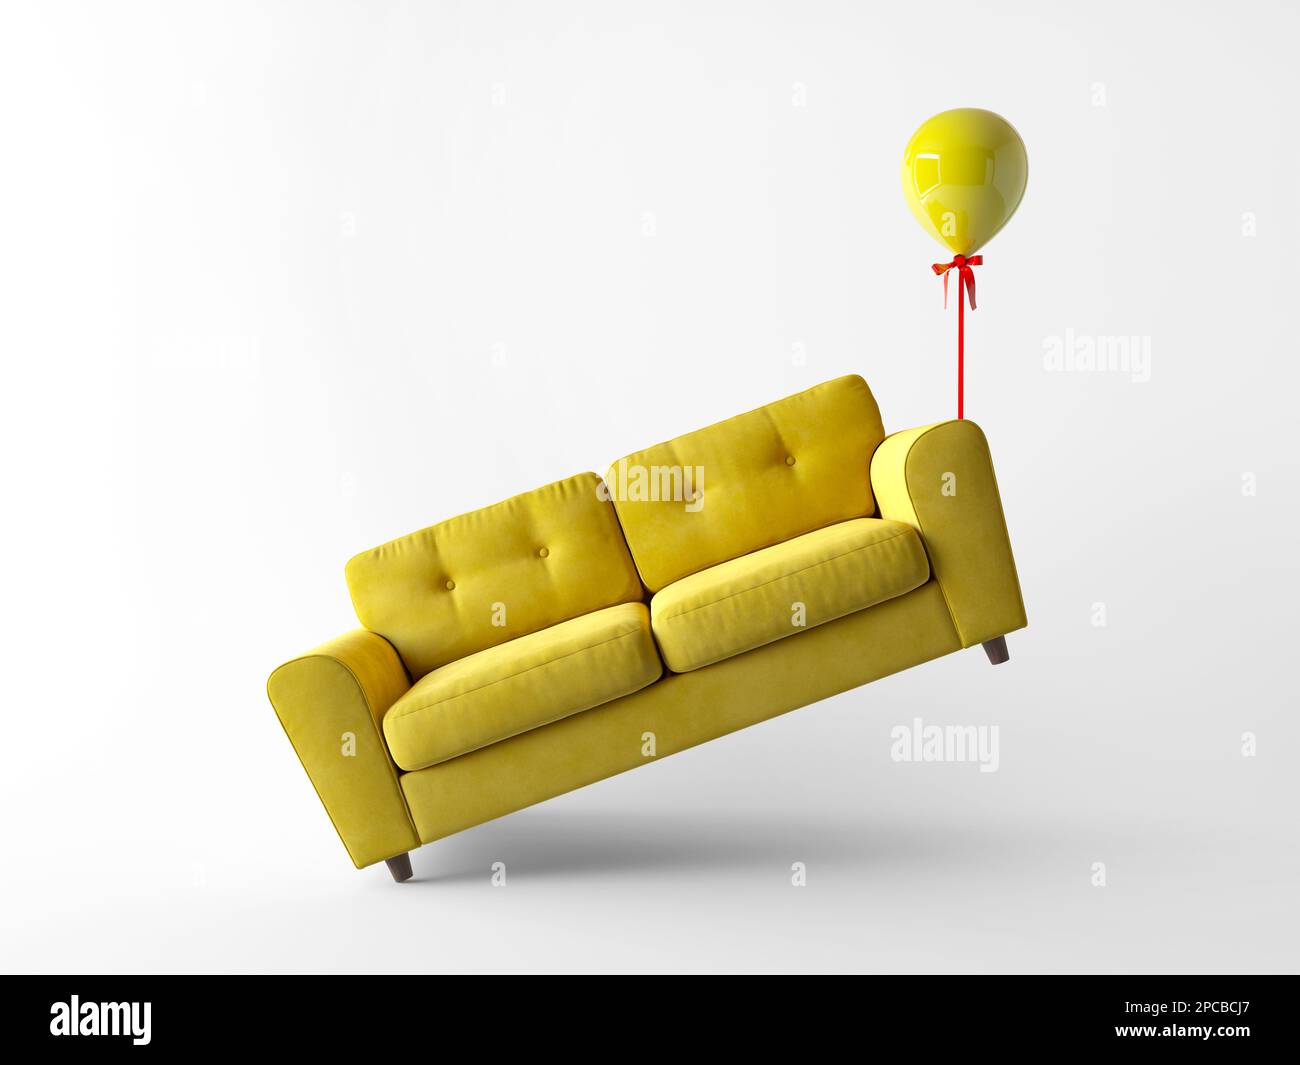 Furniture store, the prices are weightless like a balloon. Abstract creative concept idea of yellow sofa is floating up by one balloon on white back Stock Photo